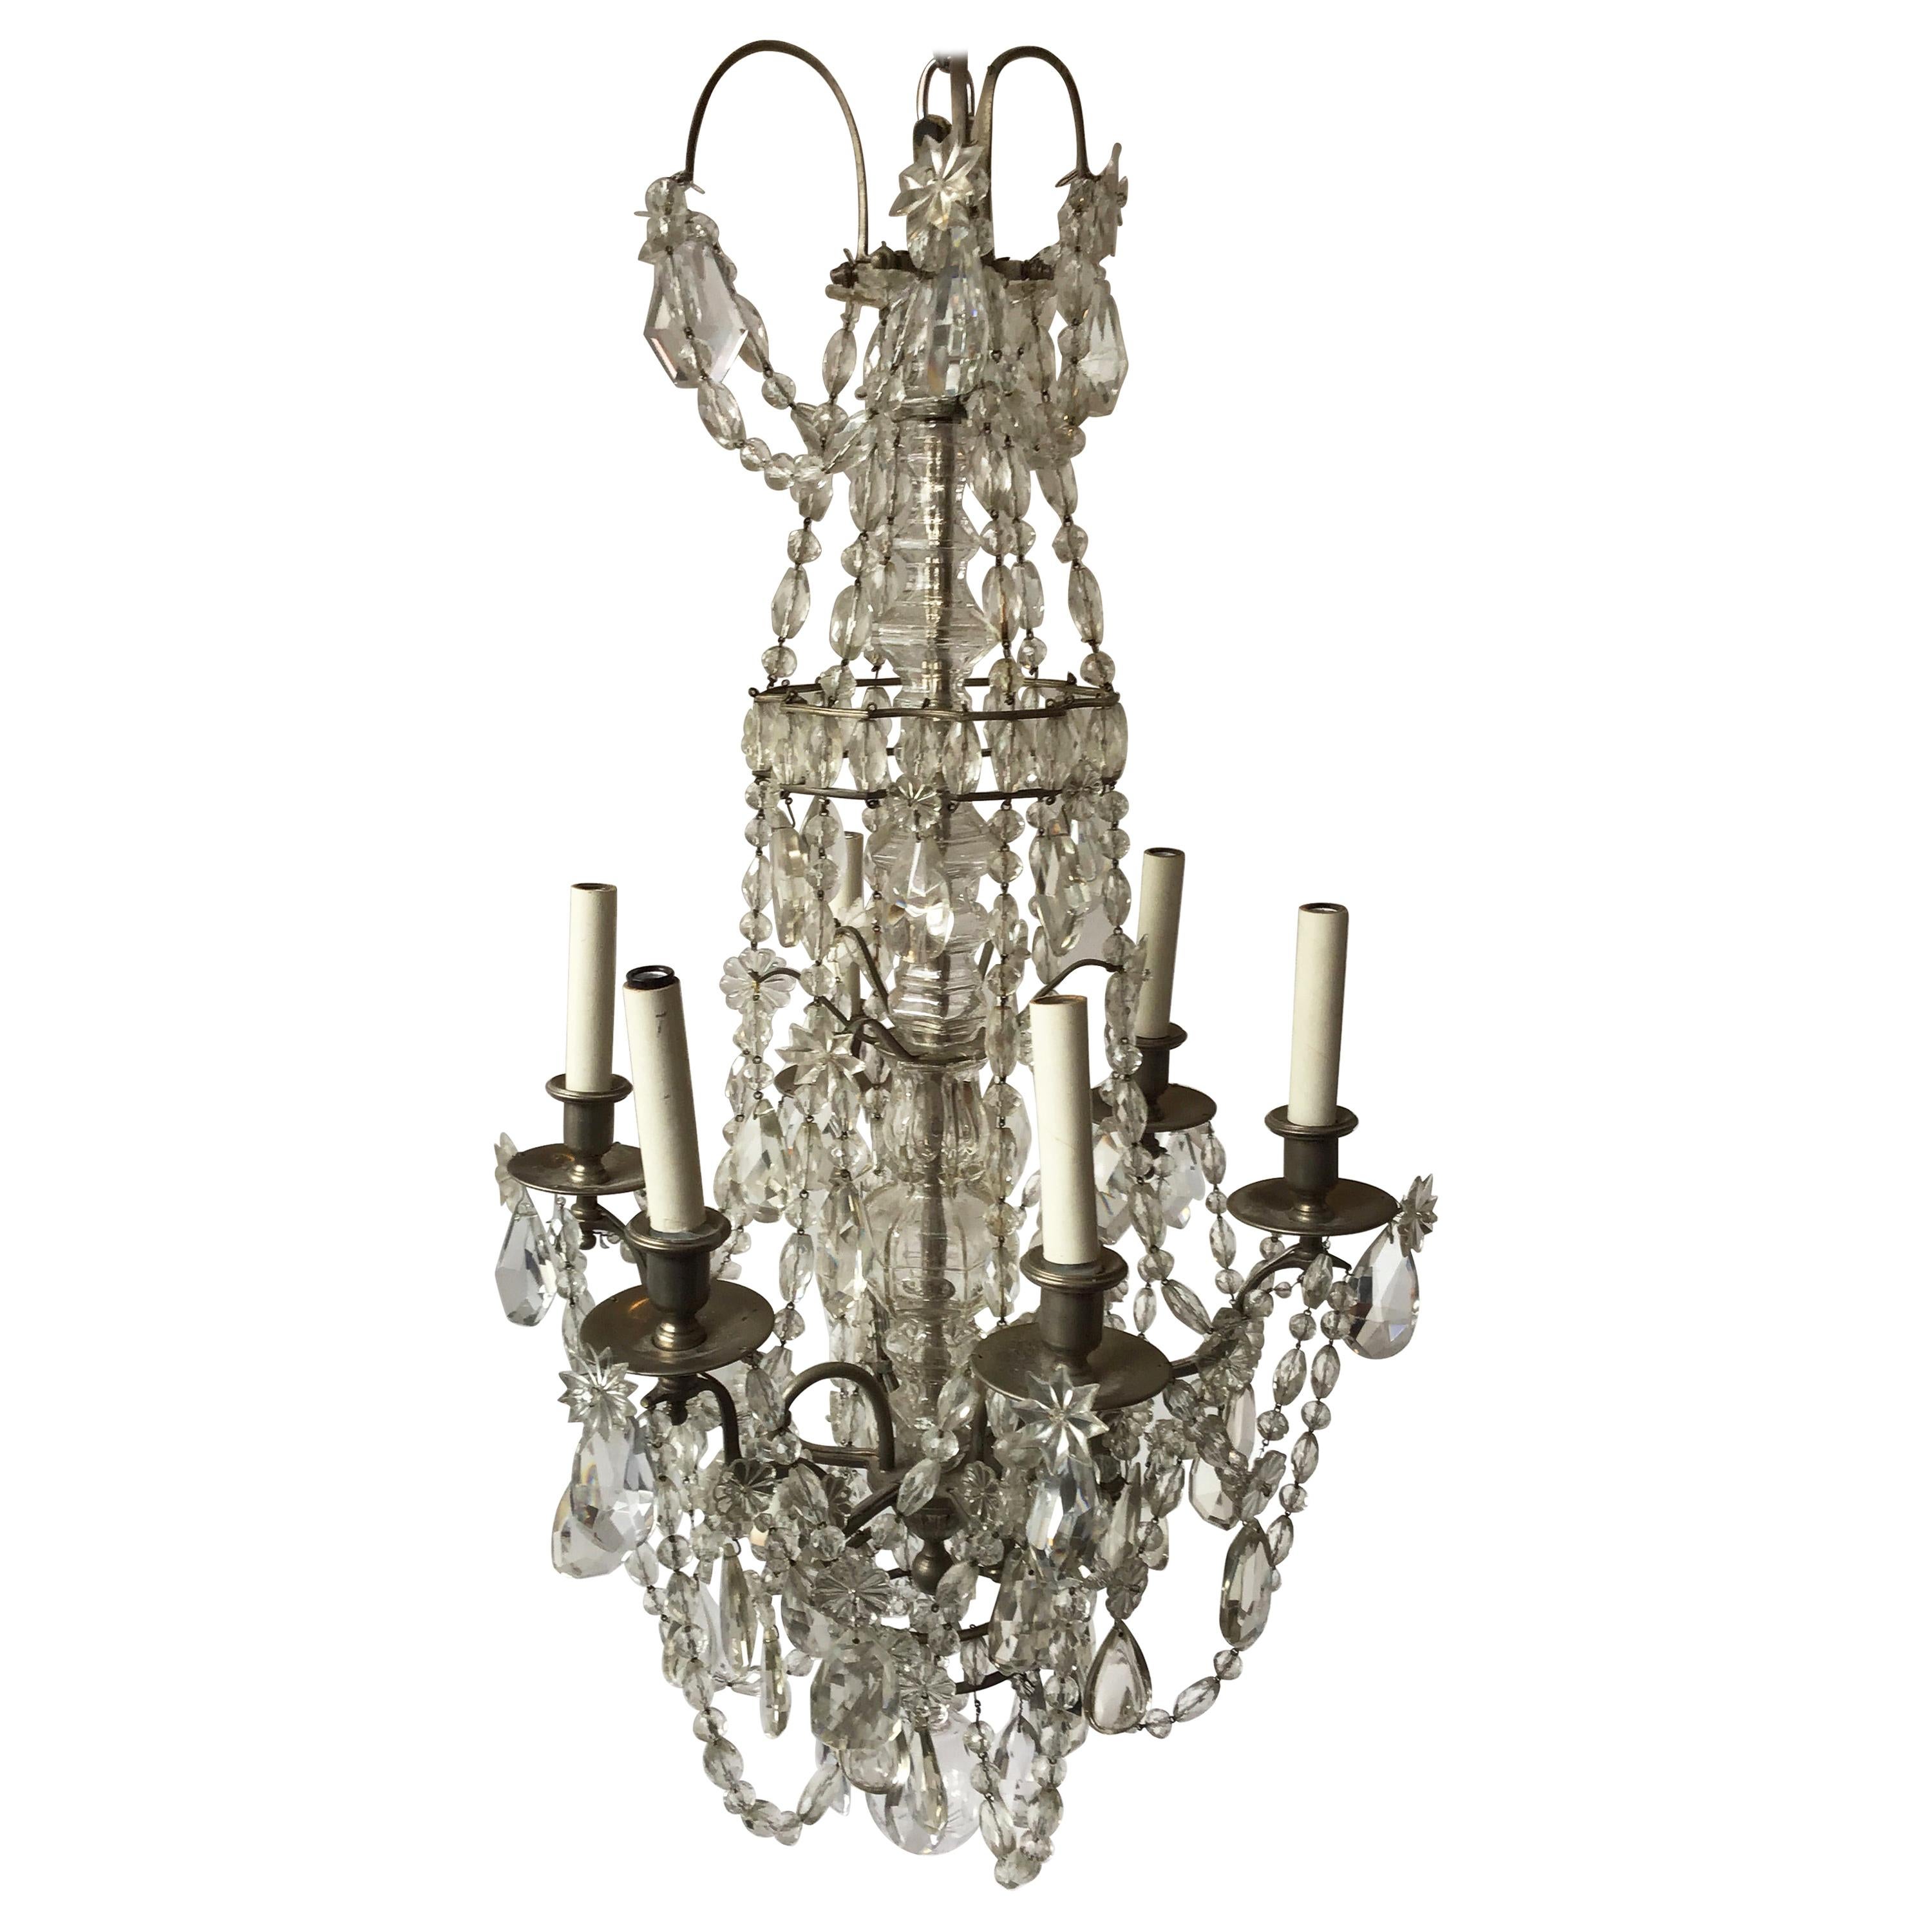 1940s French 6-arm Crystal Chandelier